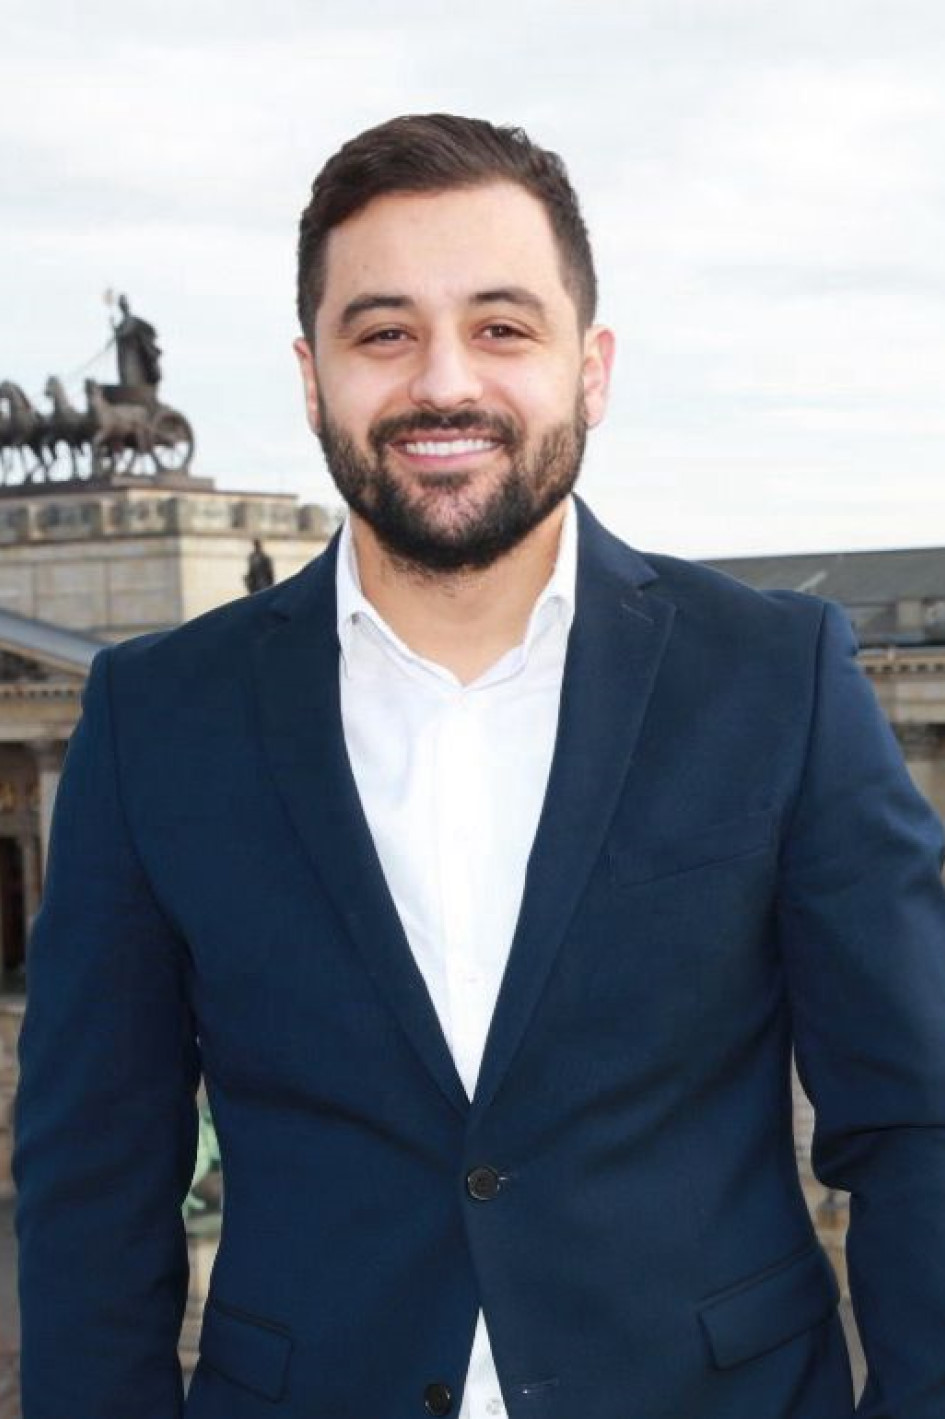 Mohamed Boufares, IISC Project Manager in Germany, Braunschweig